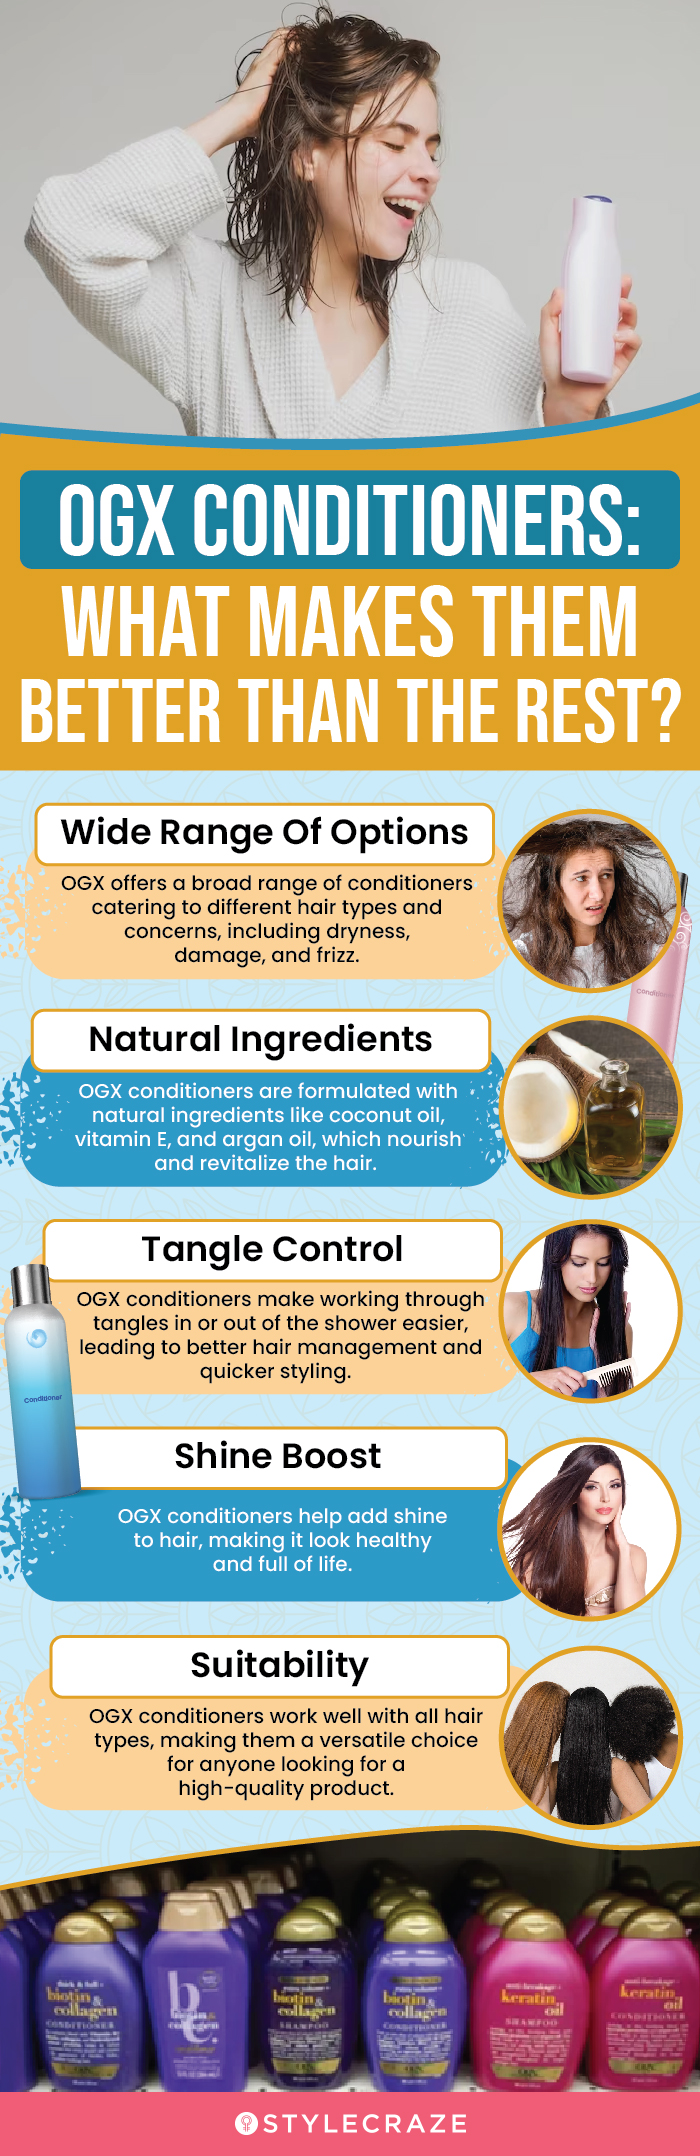 OGX Conditioners: What Makes Them Better Than The Rest? (infographic)